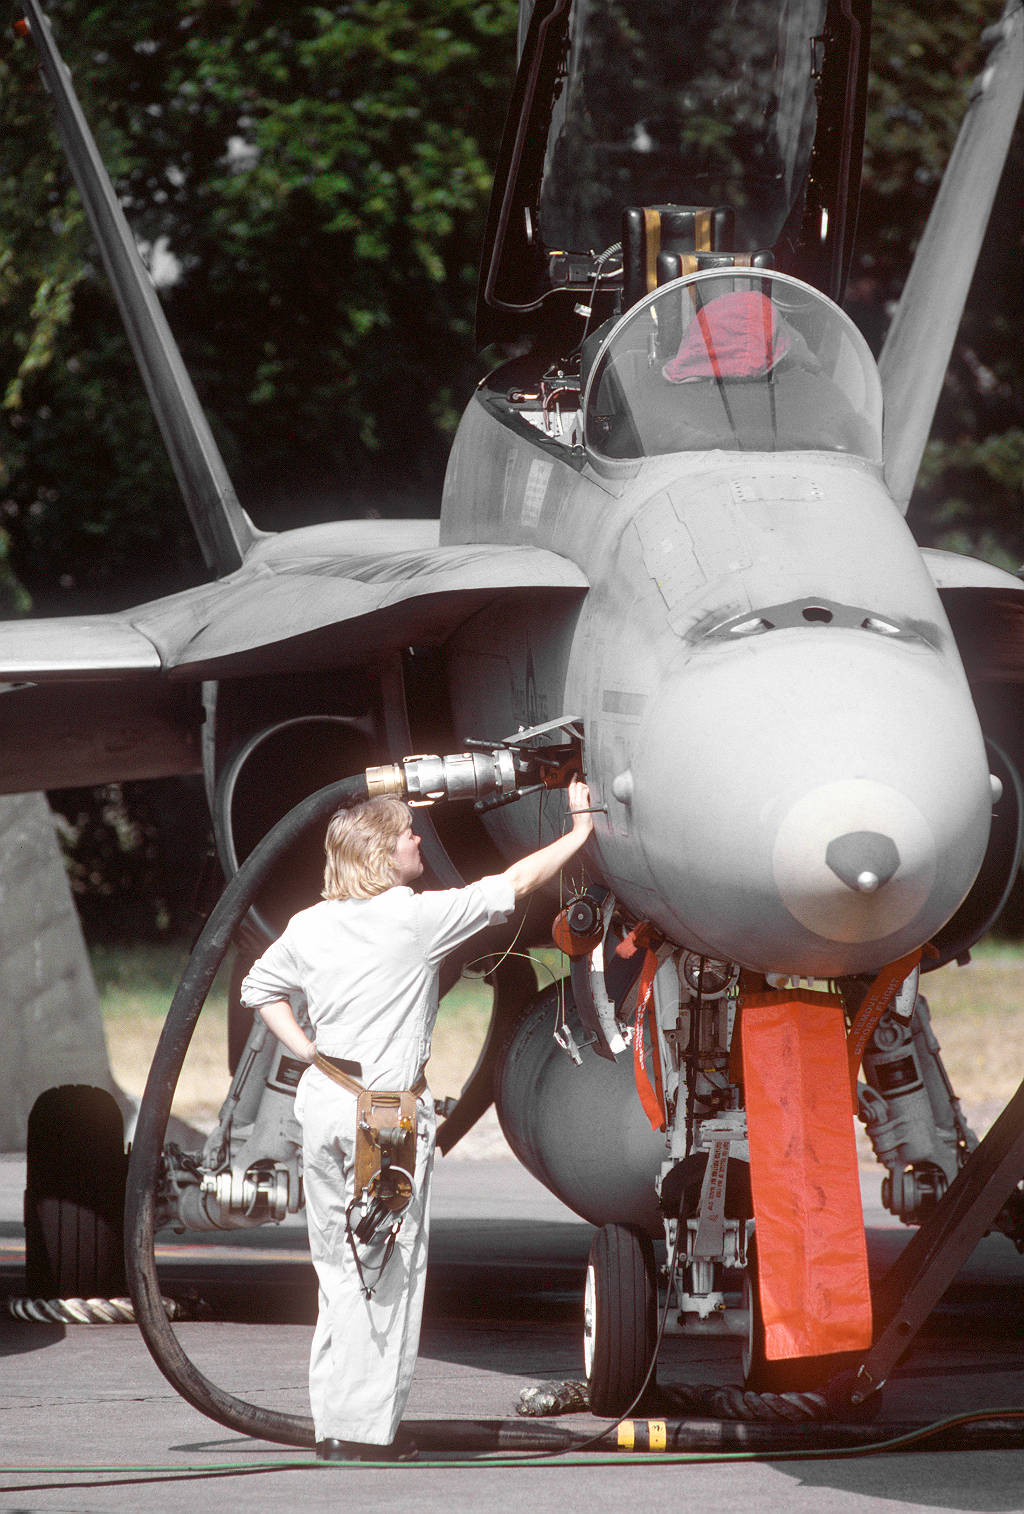 A member of the 409th Squadron refuels a CF-18 Hornet of the Canadian Forces at Söllingen airfield.